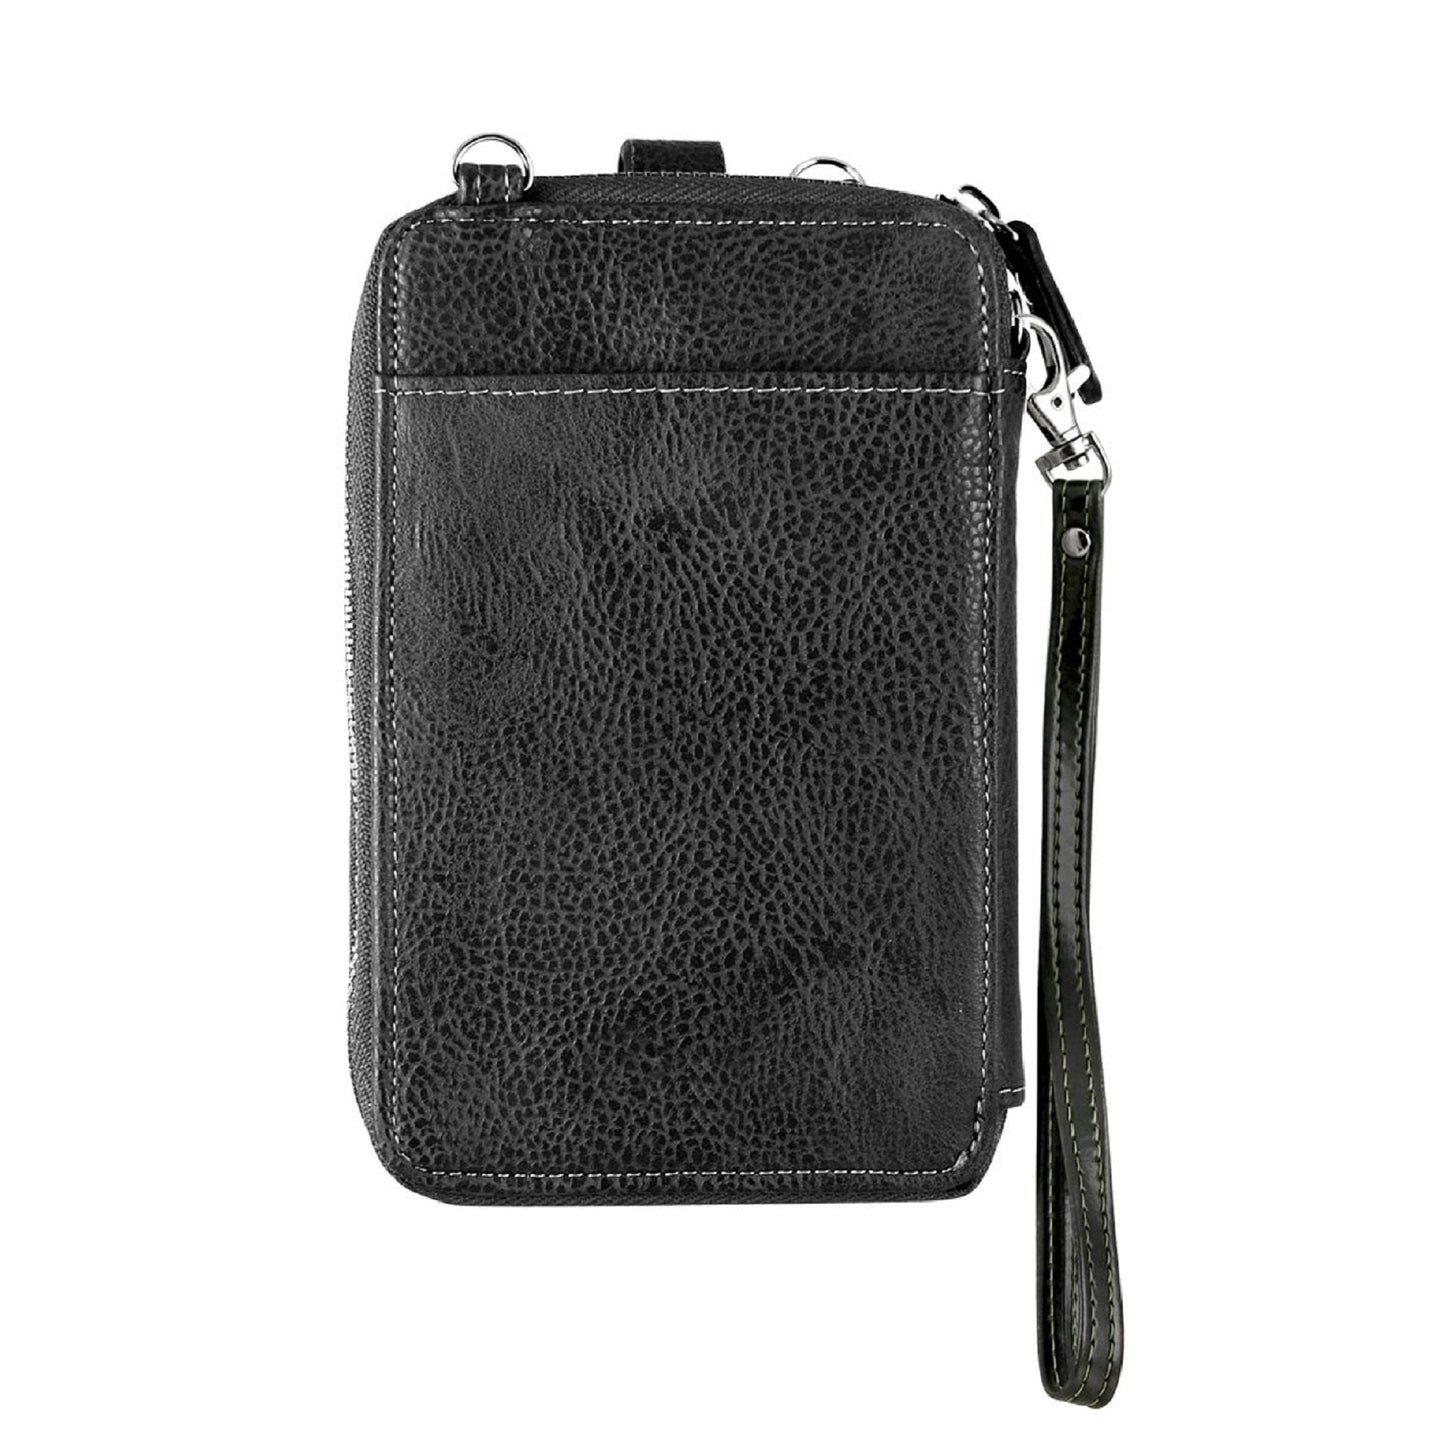 Meadow Smartphone Pouch - Black